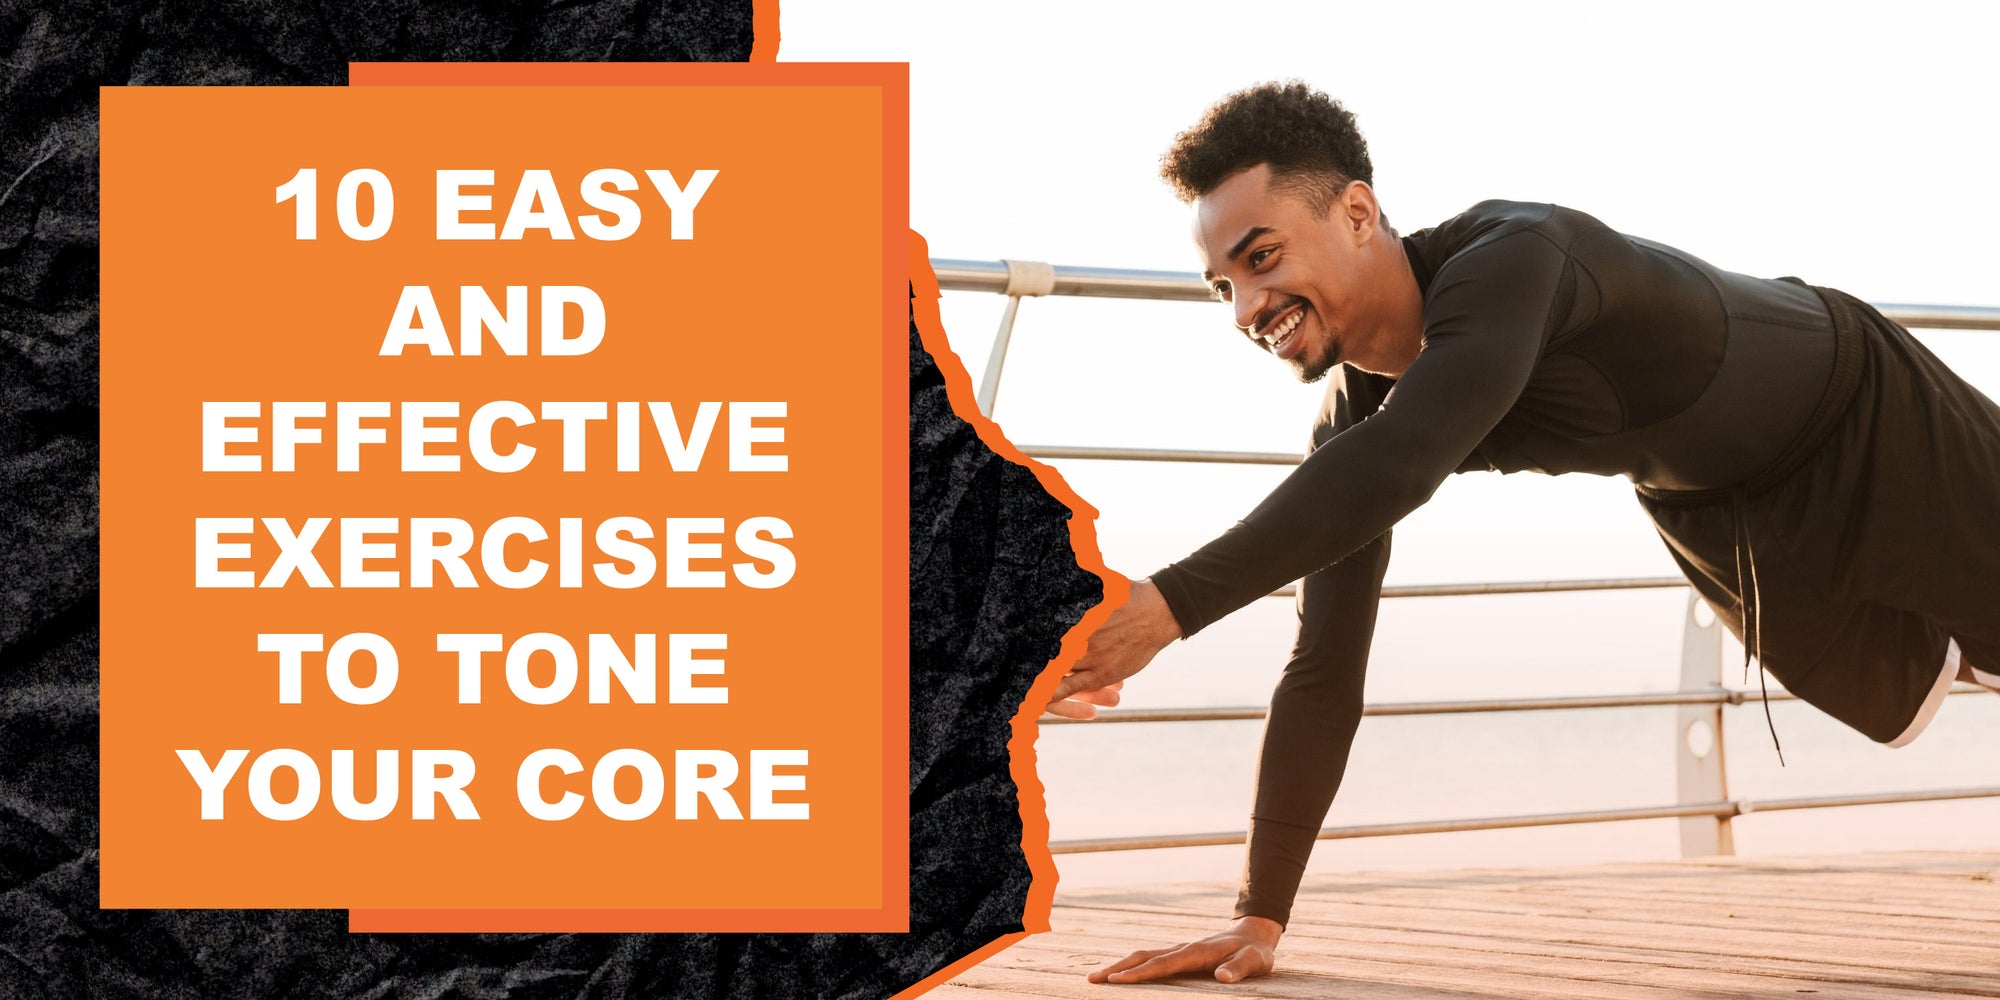 10 Easy and Effective Exercises to Tone Your Core